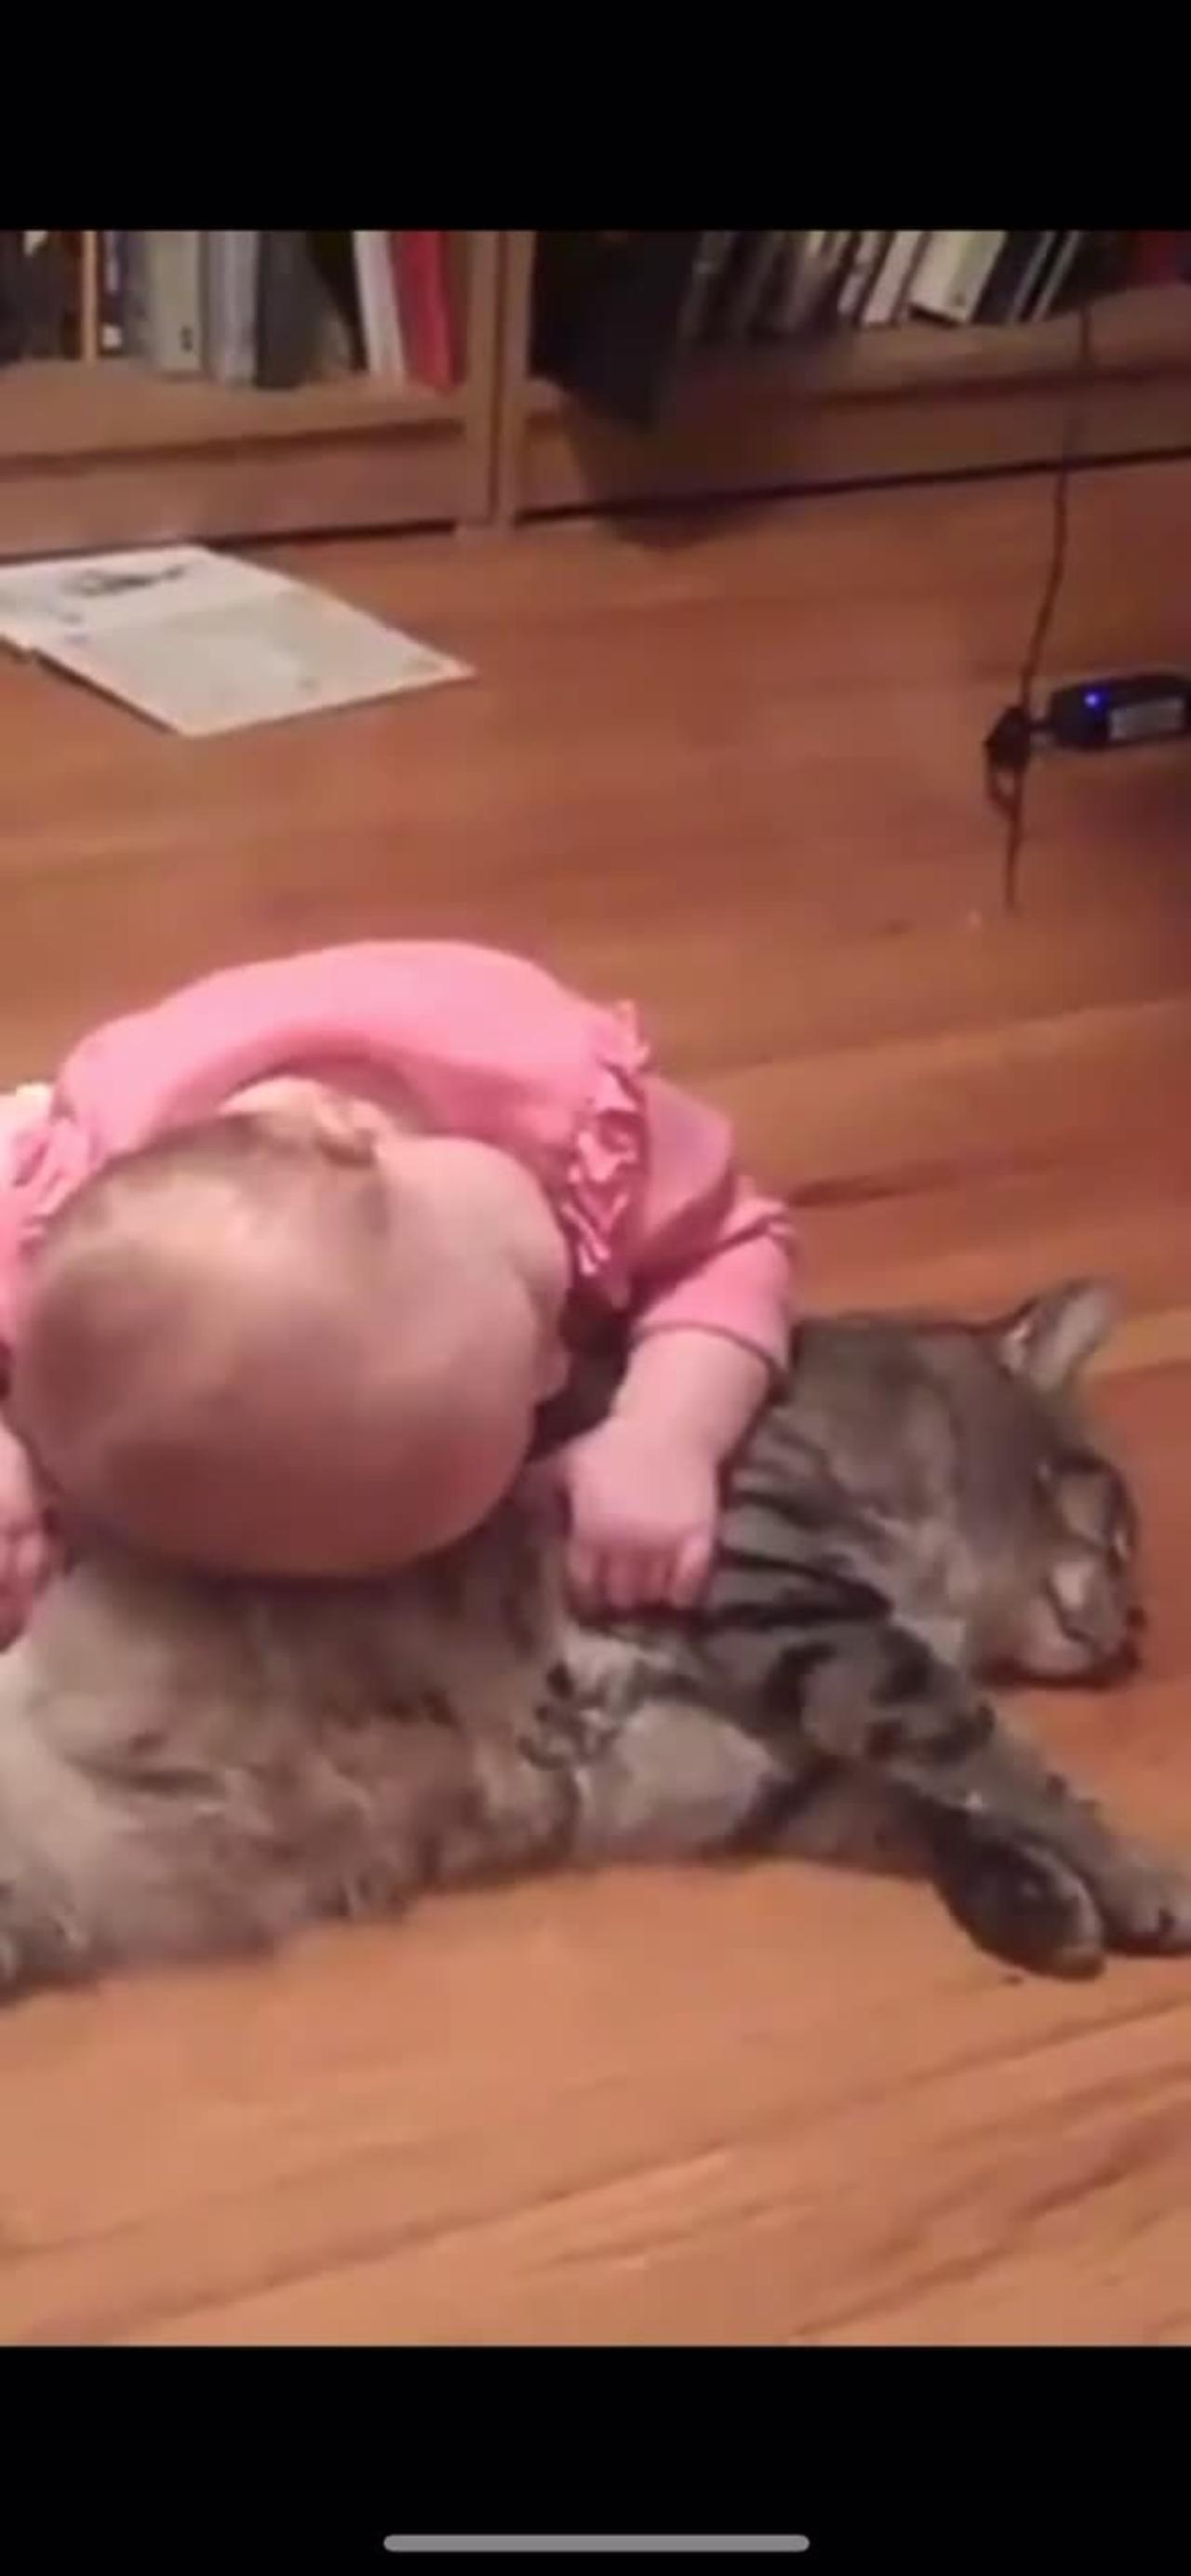 Cat & Baby fun 🤩 they’re so cute 🥰